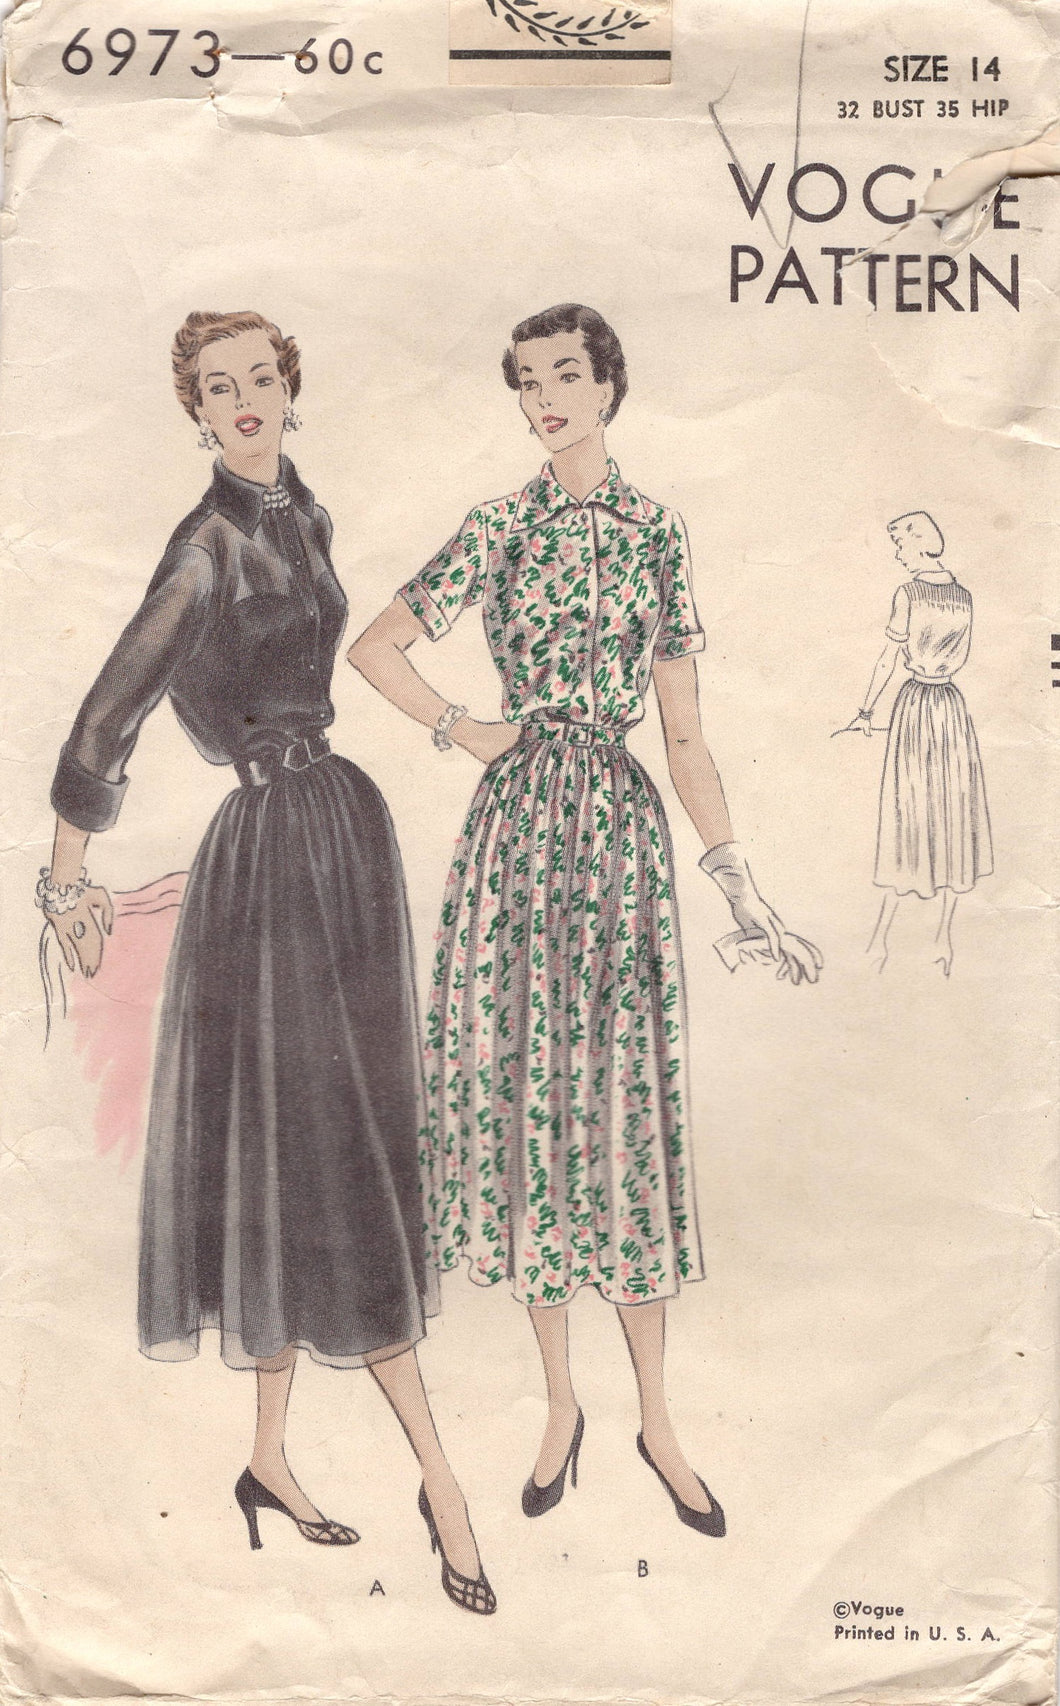 1950's Vogue One Piece Shirtwaist Dress with 3/4 sleeves or short sleeves - Bust 32